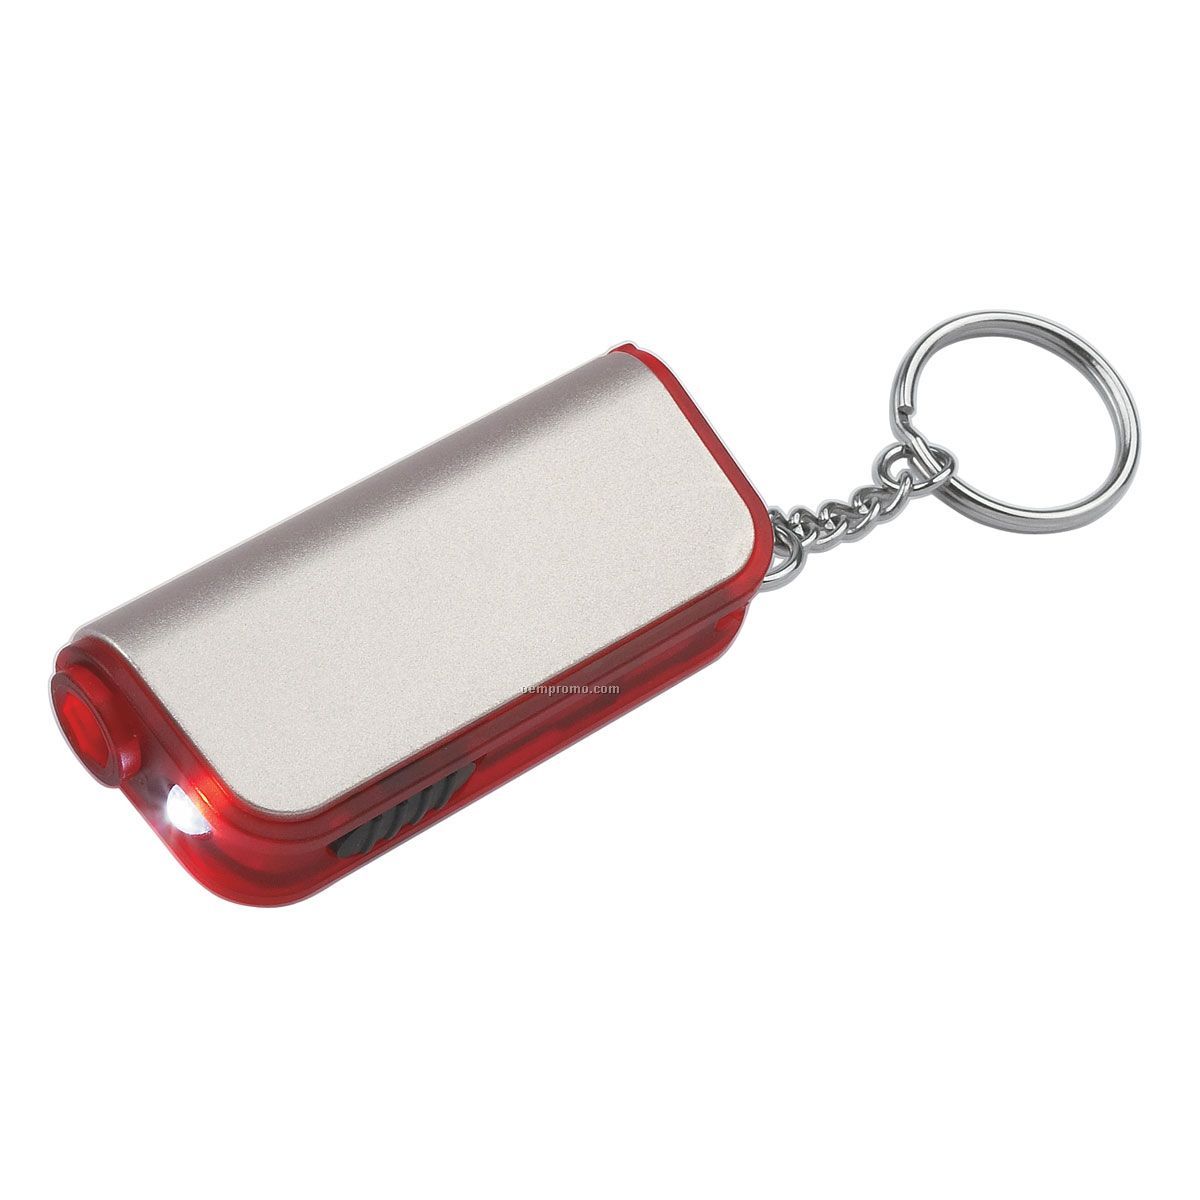 Light Up Keychain W/ Reversible Screwdrivers - Red